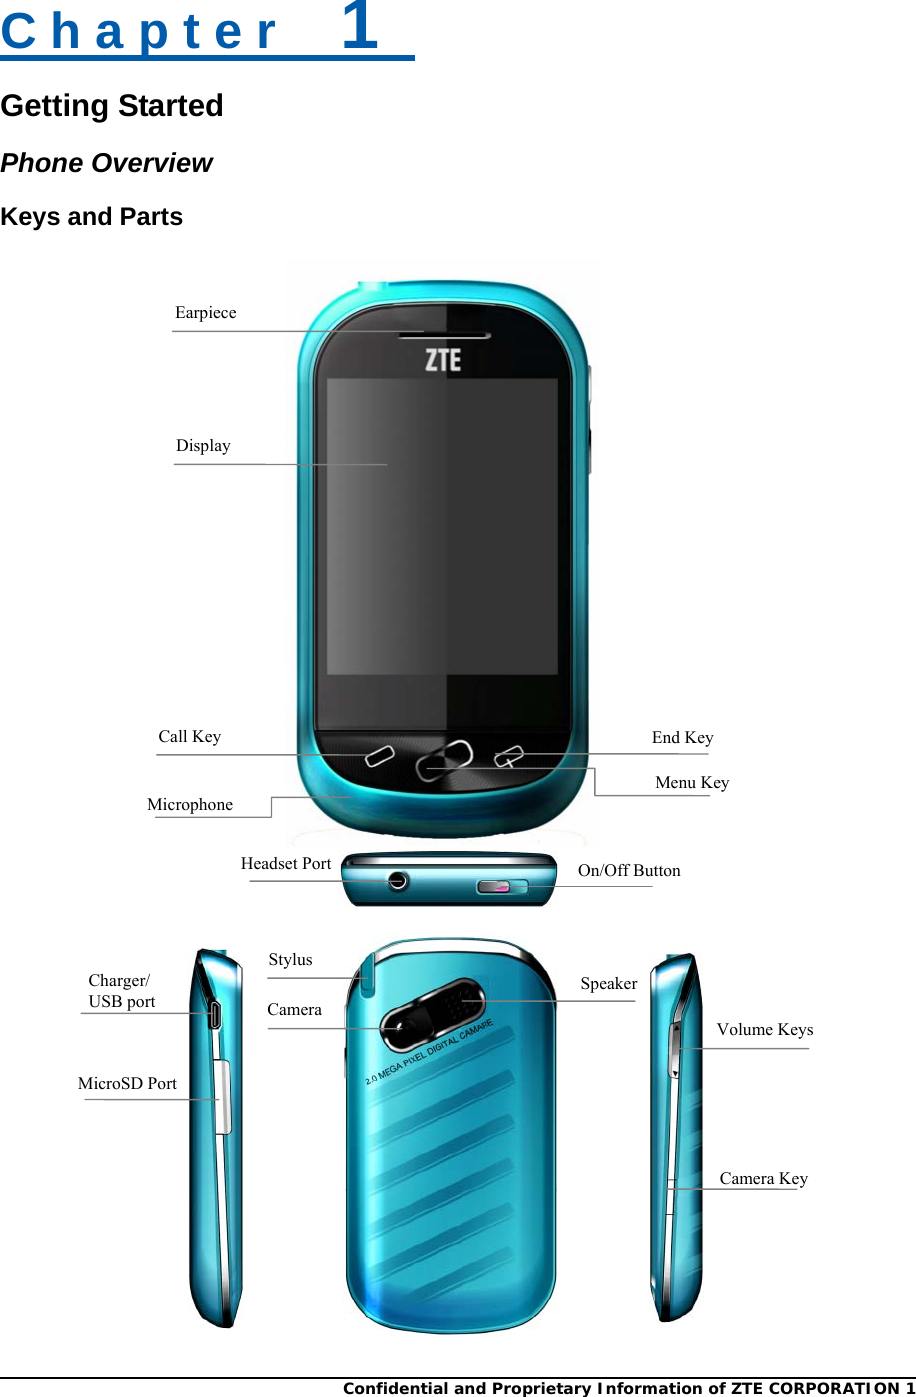  Confidential and Proprietary Information of ZTE CORPORATION 1C h a p t e r    1   Getting Started Phone Overview Keys and Parts                              Call Key Earpiece   Menu Key   Microphone    End Key    Display    Headset Port    On/Off Button   MicroSD Port   Charger/ USB port    Speaker  Camera Stylus   Camera Key     Volume Keys     